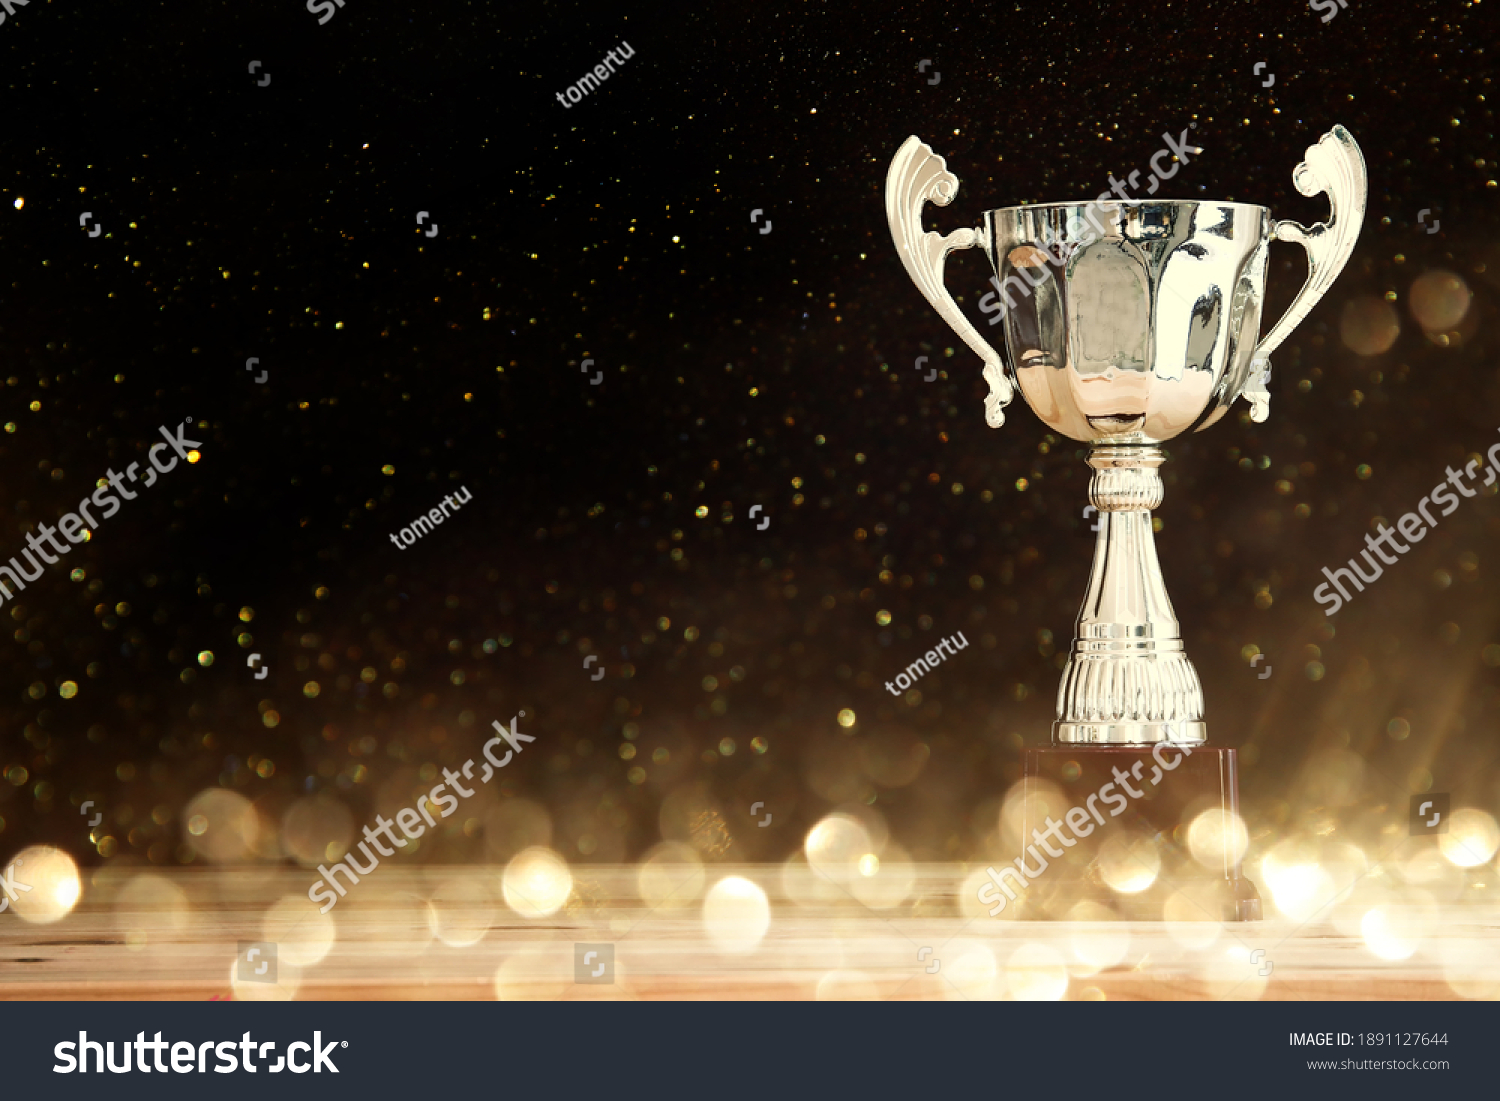 image of silver trophy over wooden table and dark background, with abstract shiny lights #1891127644